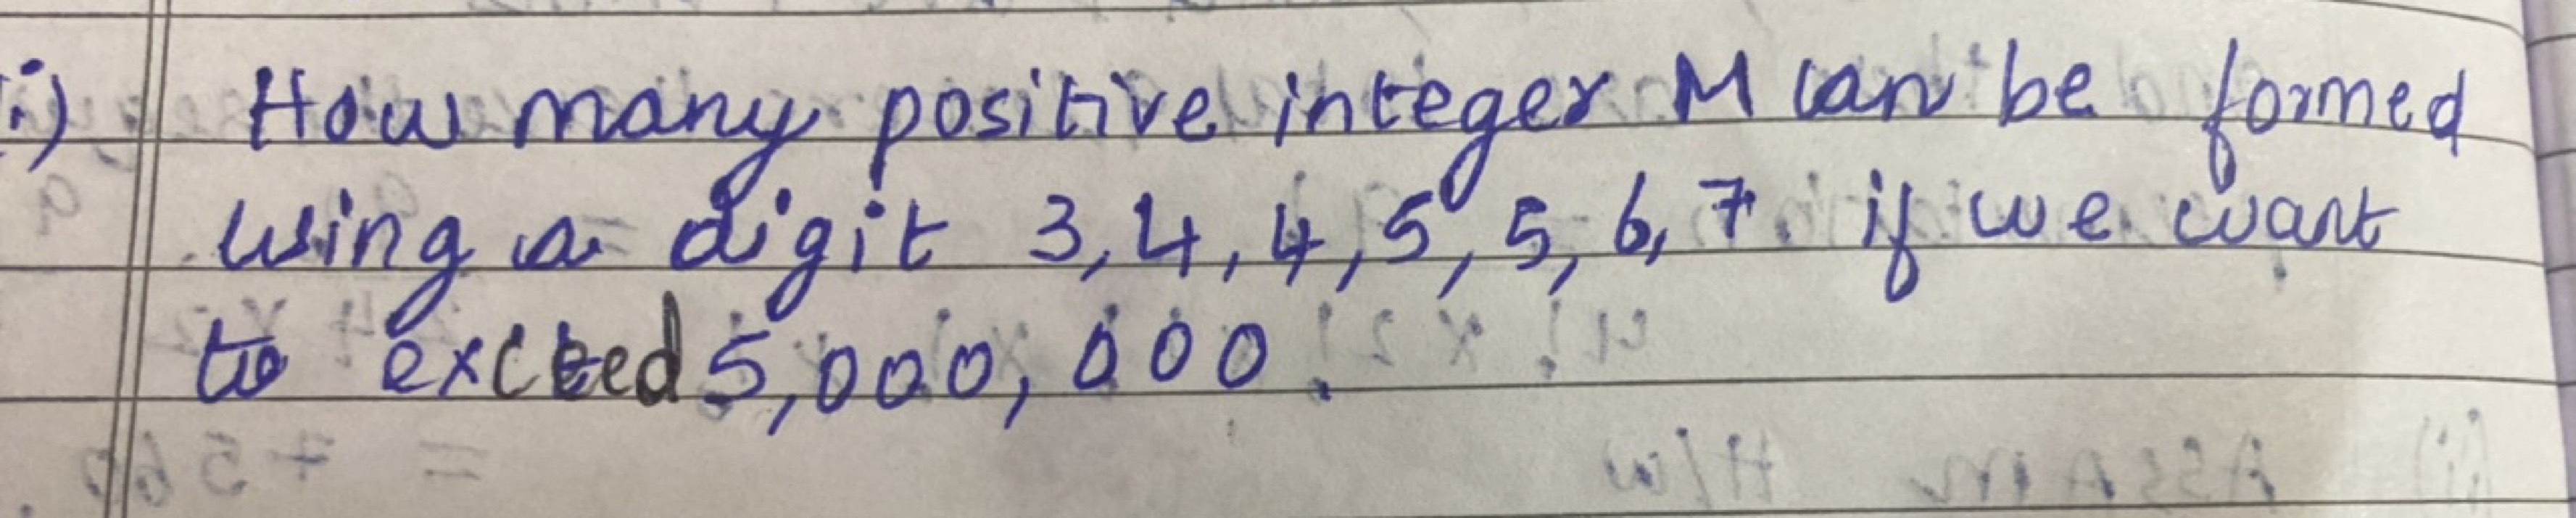 i) How many positive integer M can be formed using a digit 3,4,4,5,5,6